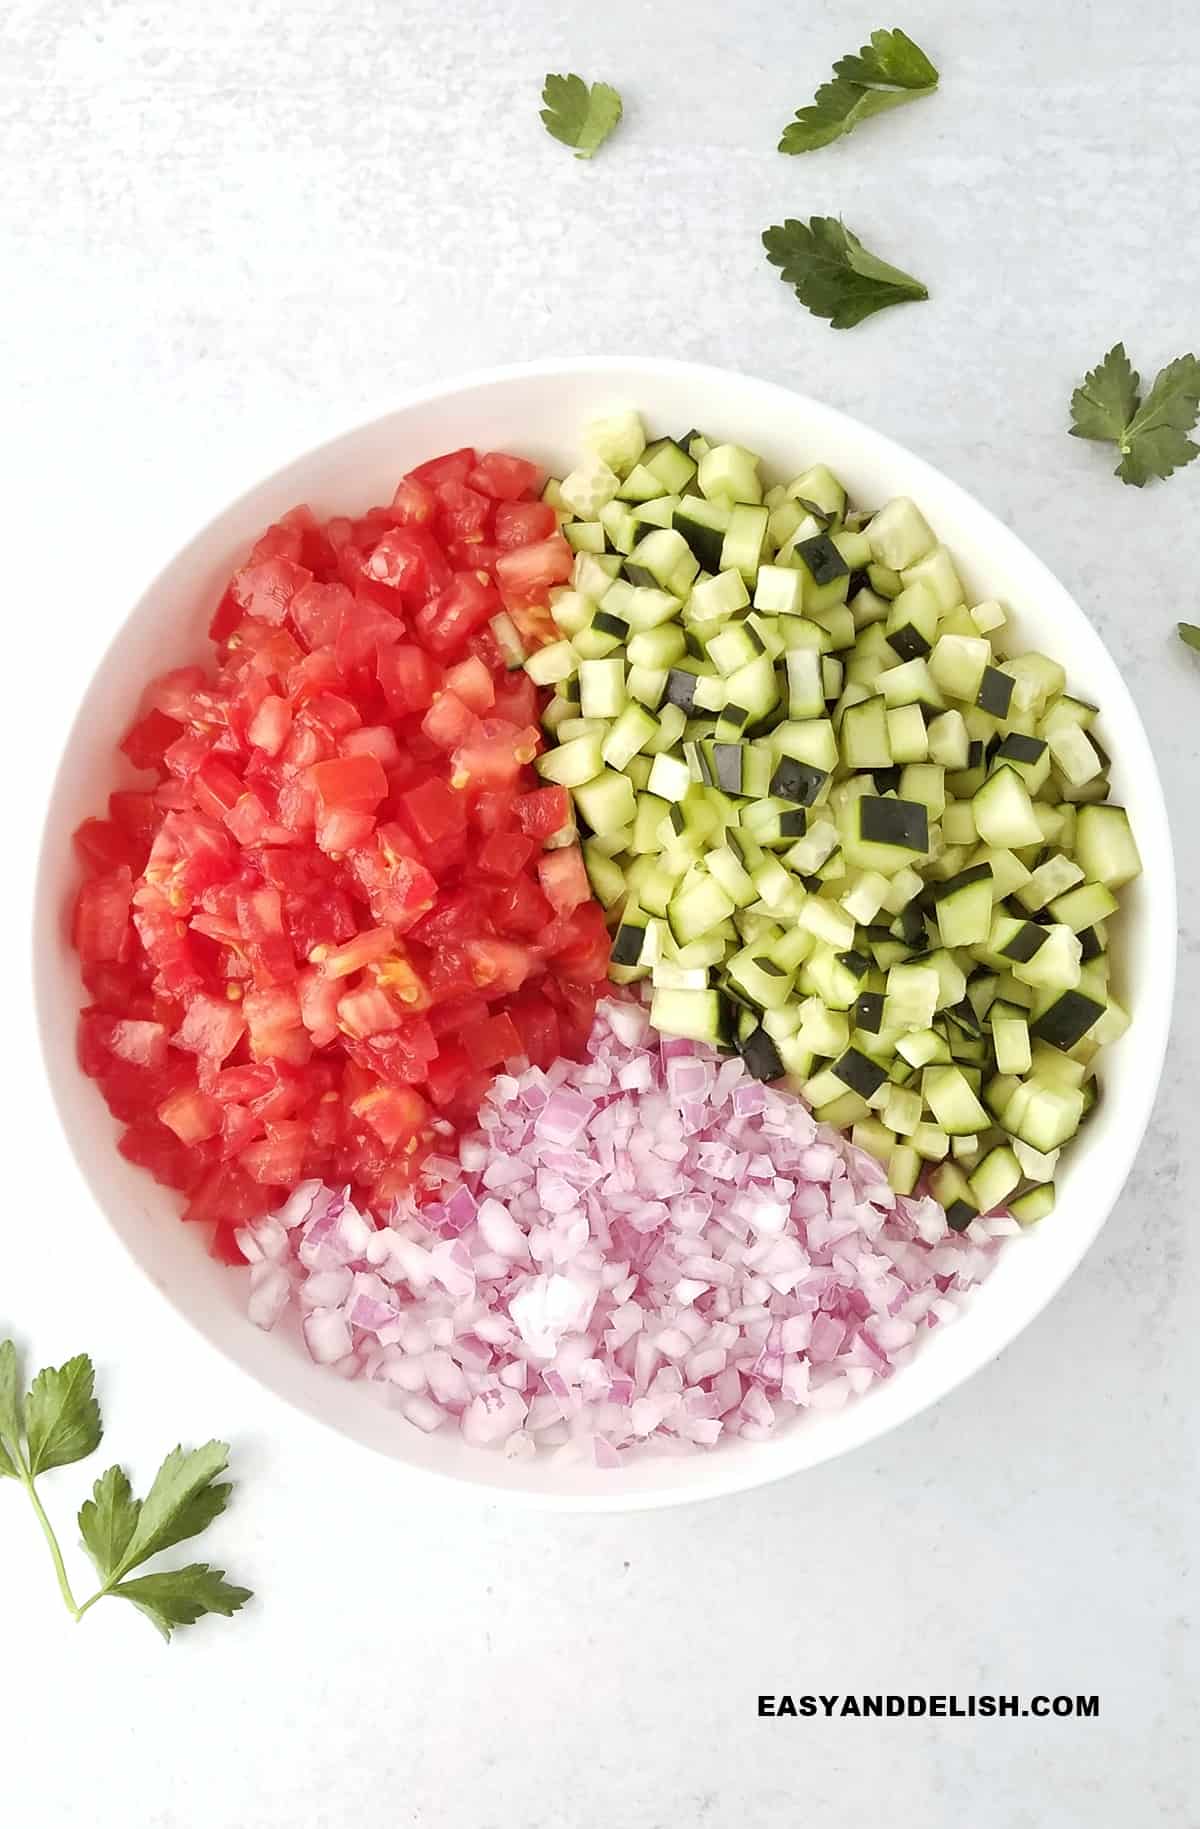 diced tomatoes, cucumber, and red onion in a bowl.